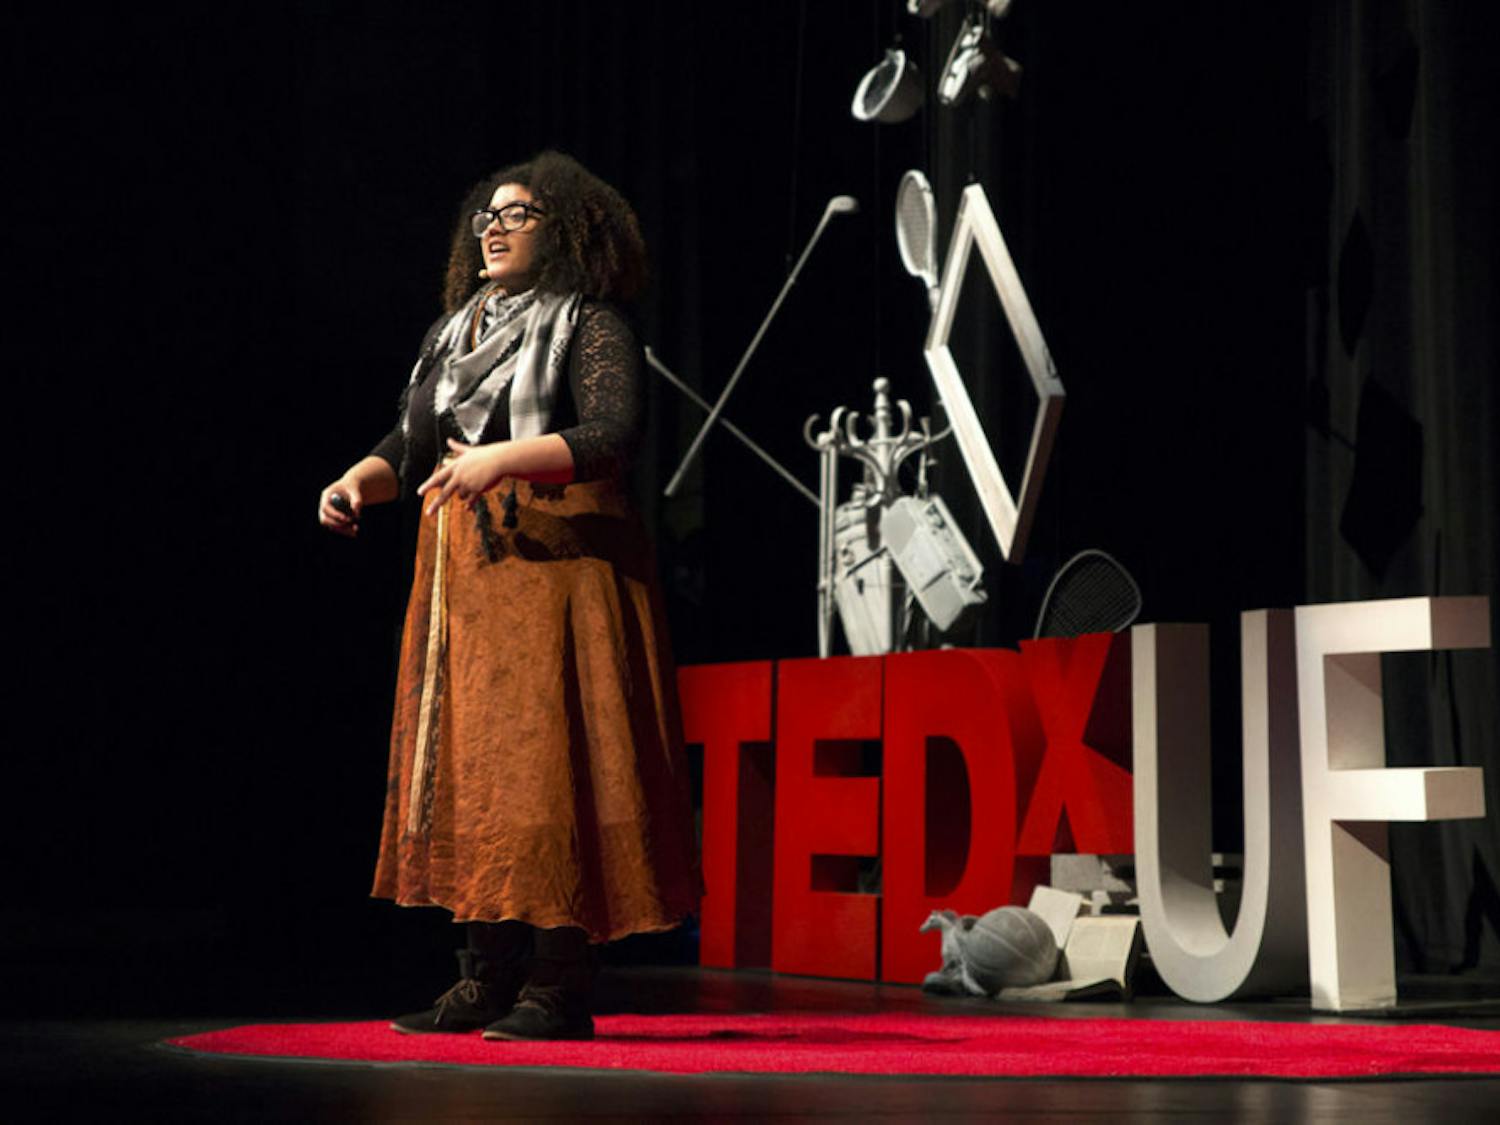 Veronica Hernandez, a UF digital arts and sciences senior, speaks about video games and apathy during the 2016 TEDxUF. “The world is under attack,” the 21-year-old said. “Apathy isn’t just a villain, it’s a supervillain.”